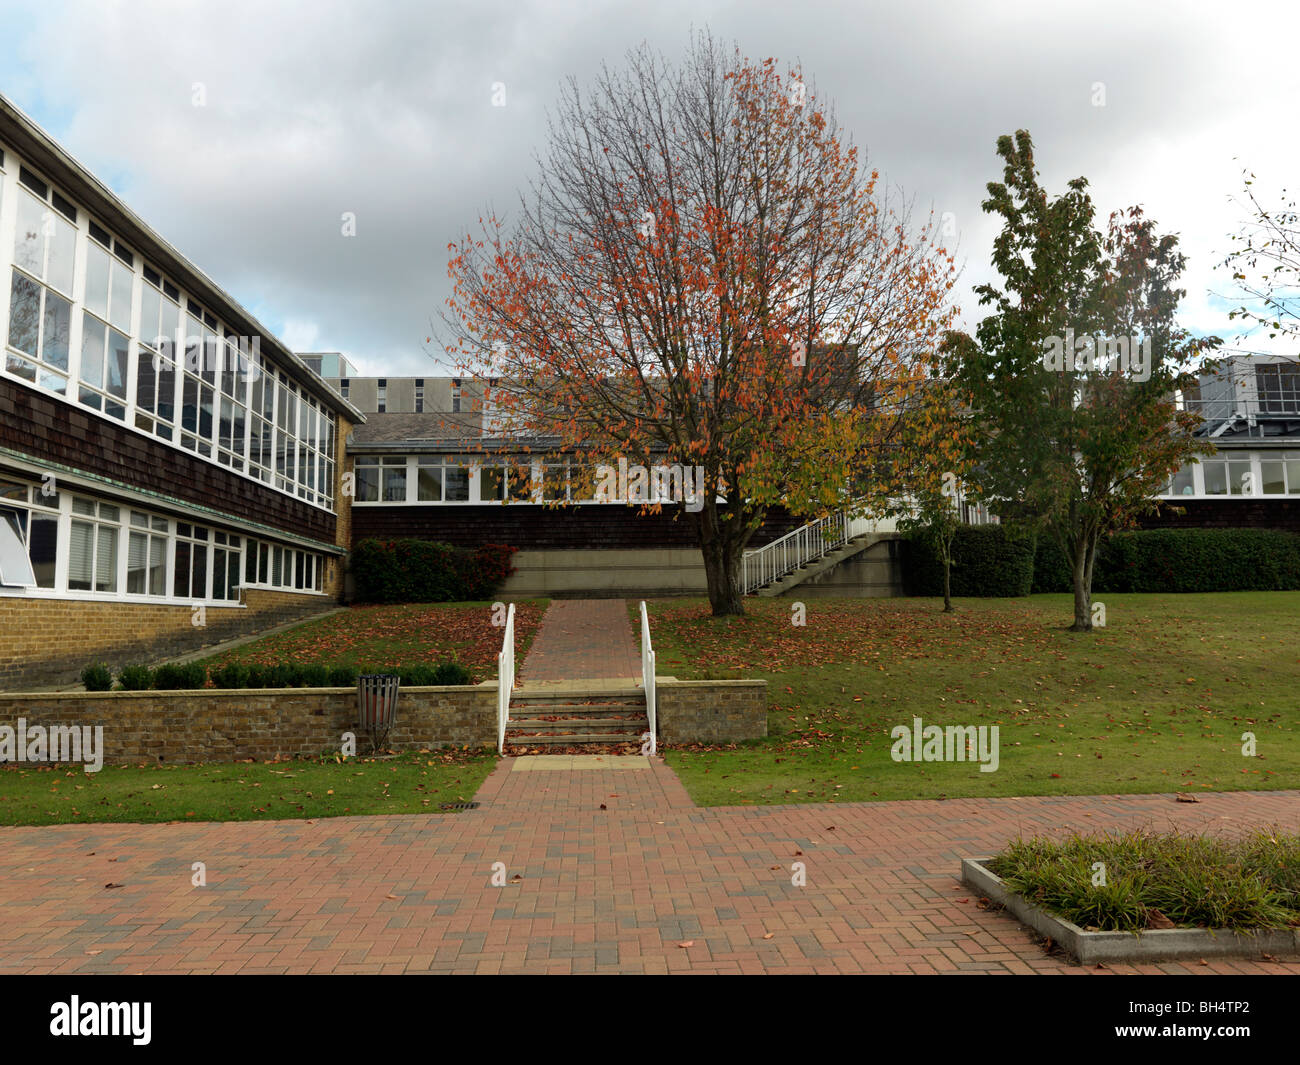 University Buildings on the Campus of the University of Hertfordshire England Stock Photo